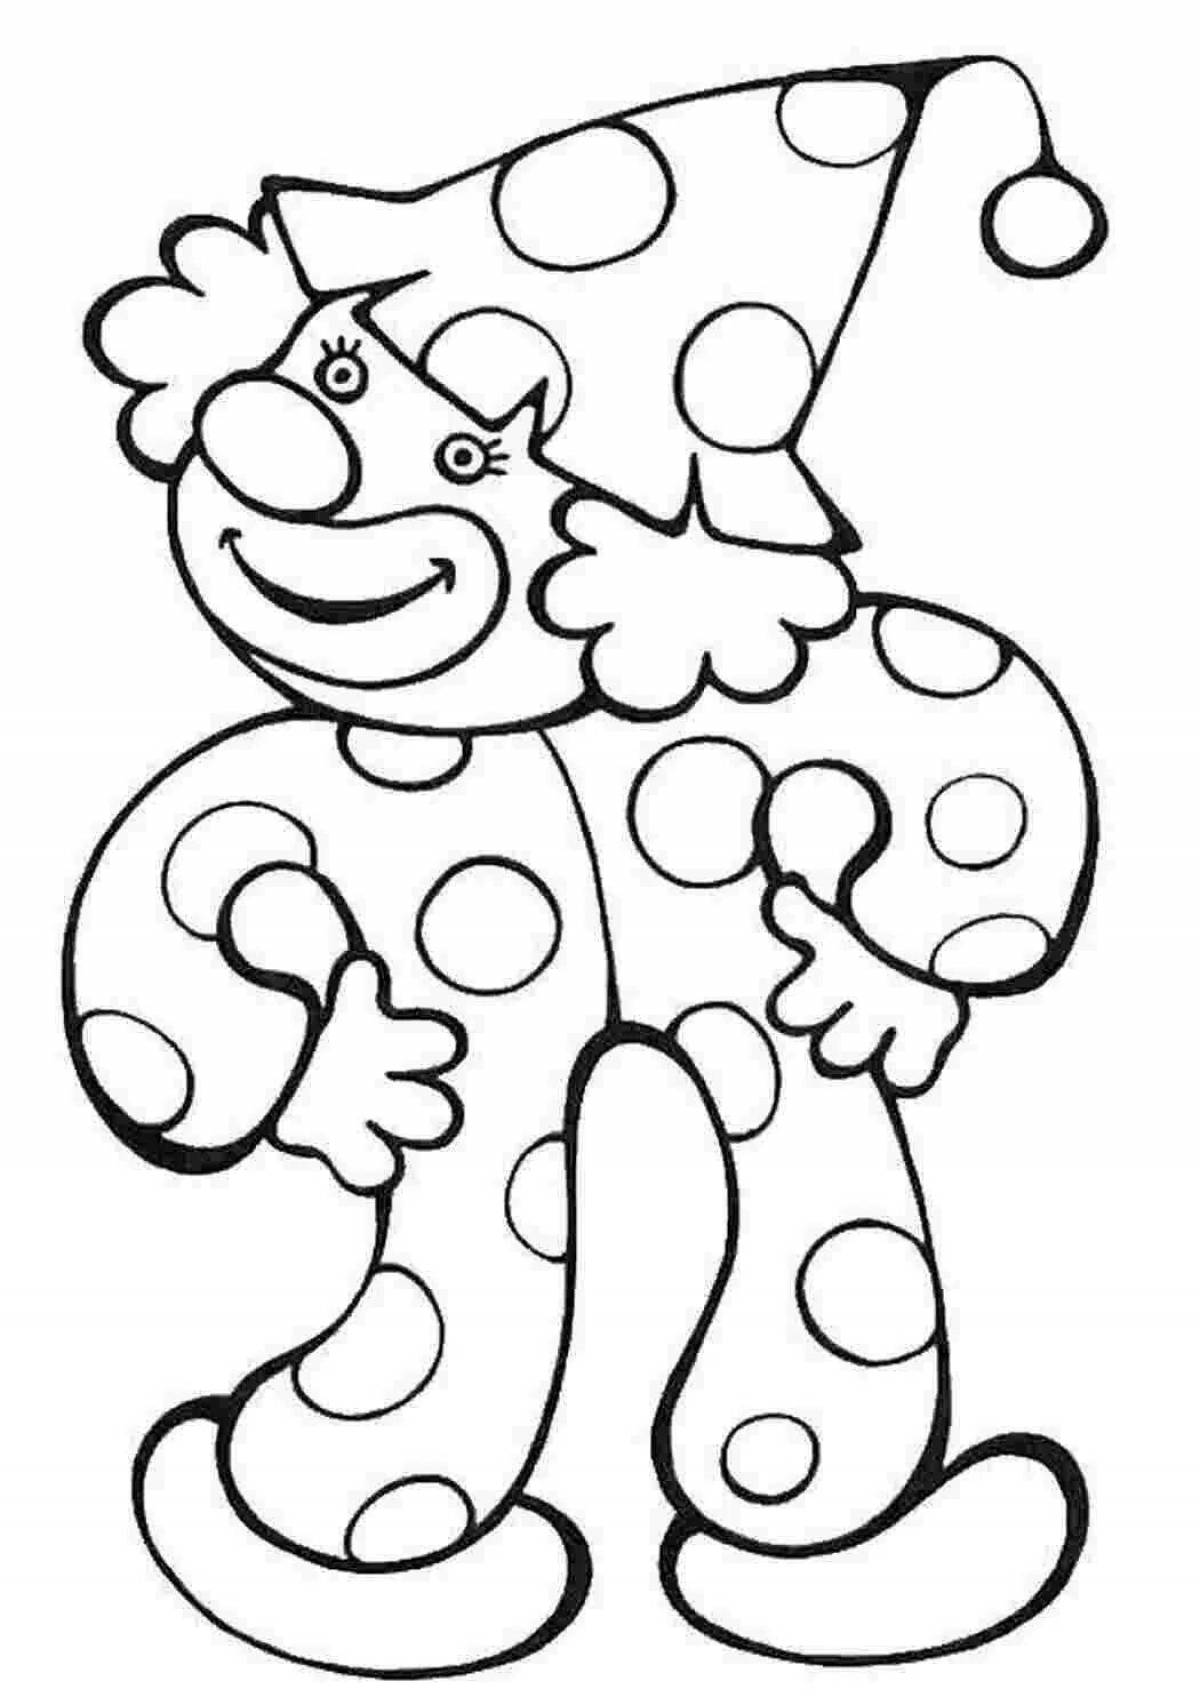 Bright buffoon coloring for kids